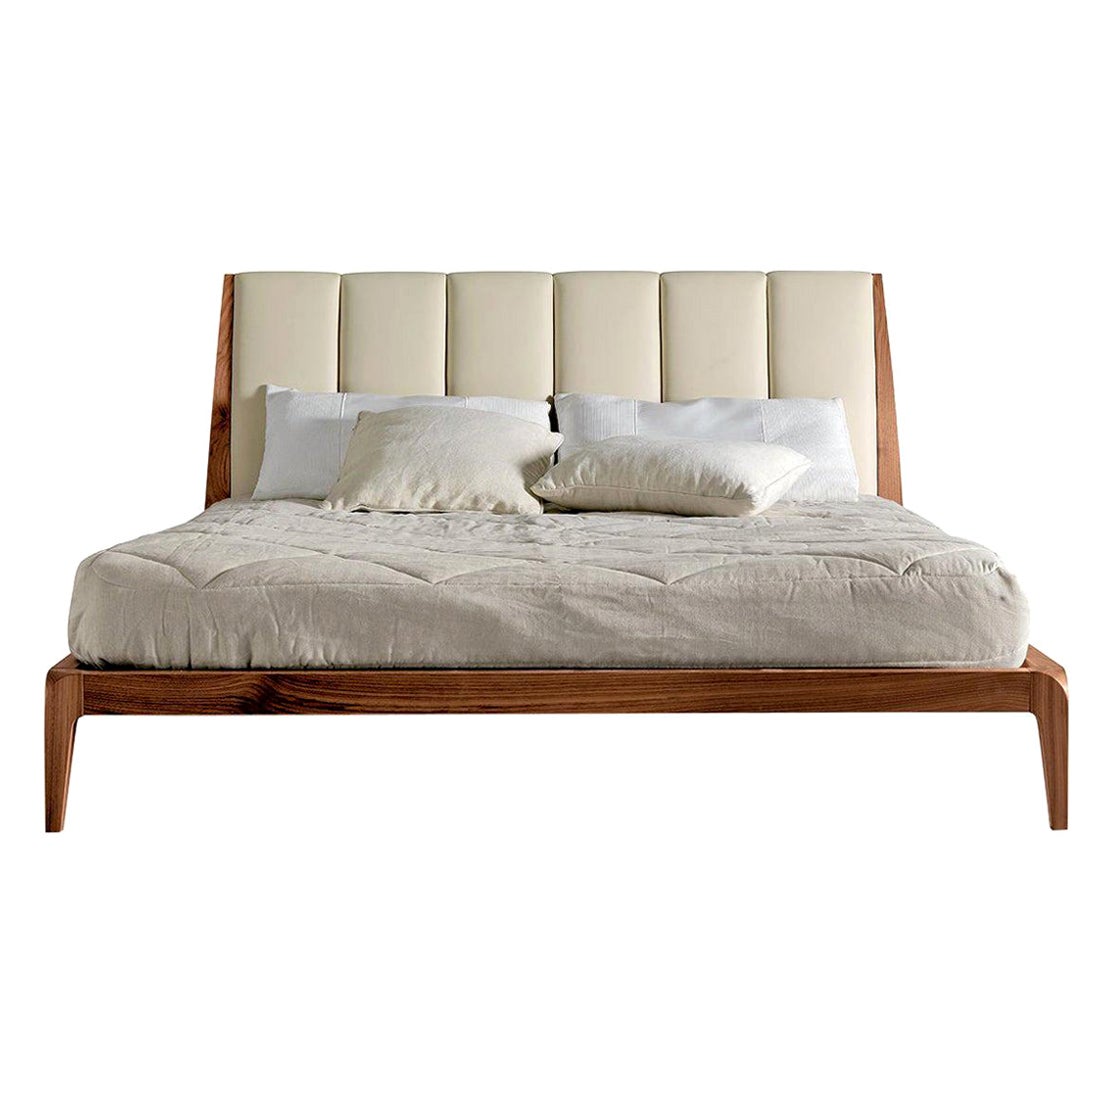 Verso Nord Solid Wood Bed, Walnut in Hand-Made Natural Finish, Contemporary For Sale